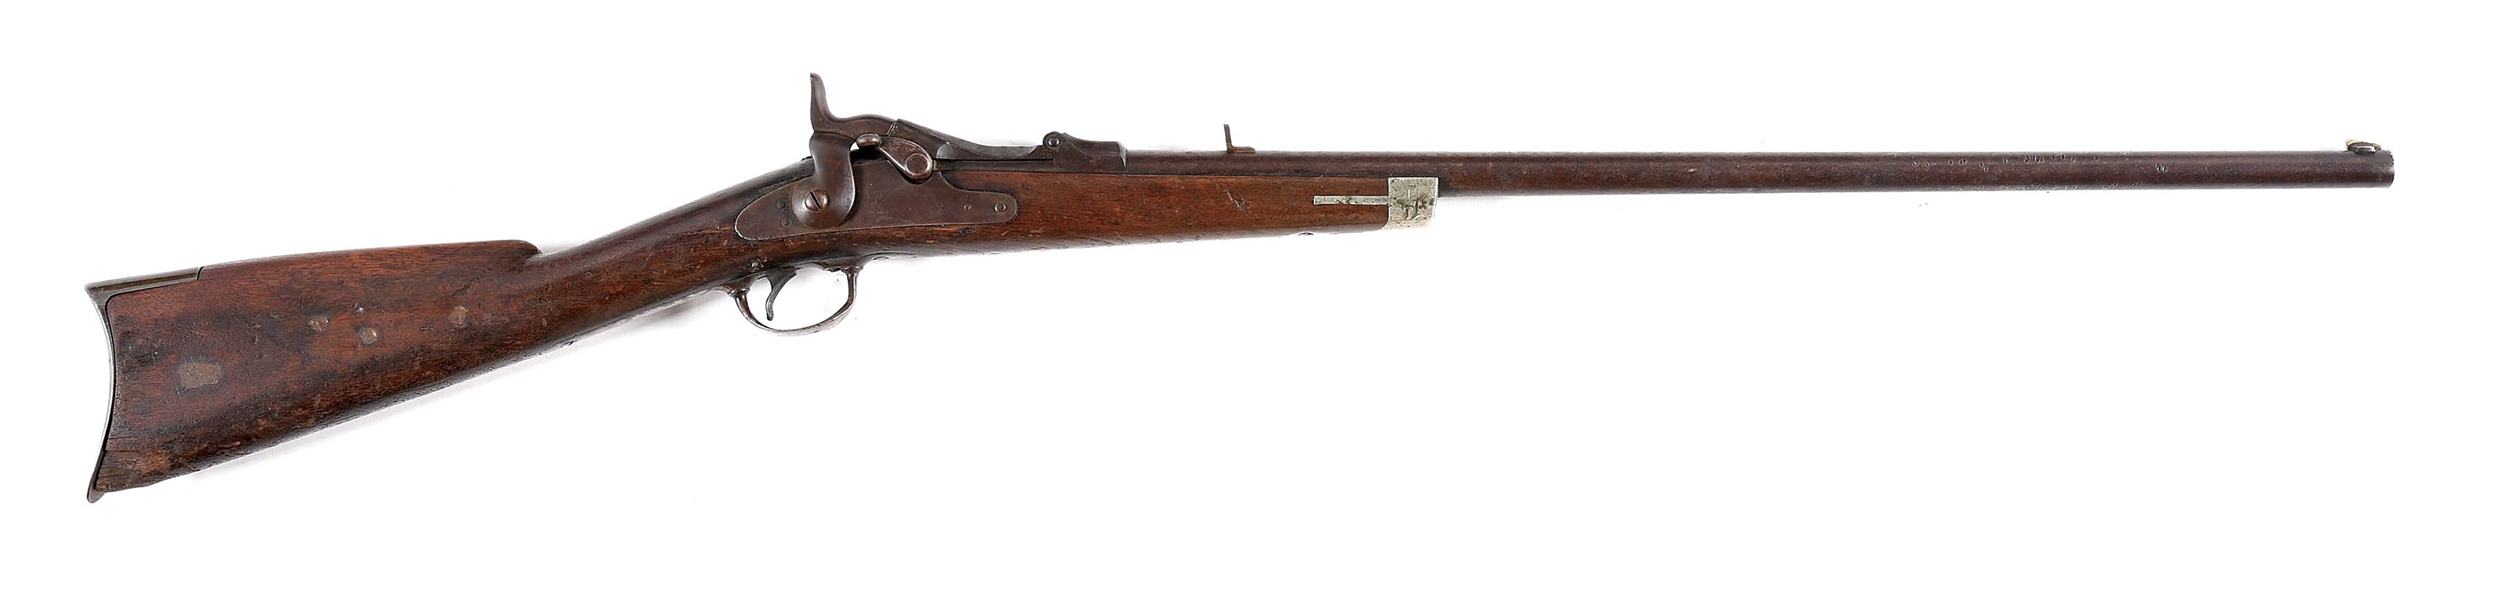 (A) CLASSIC ROCKY MOUNTAIN TRAPDOOR SPORTING RIFLE.